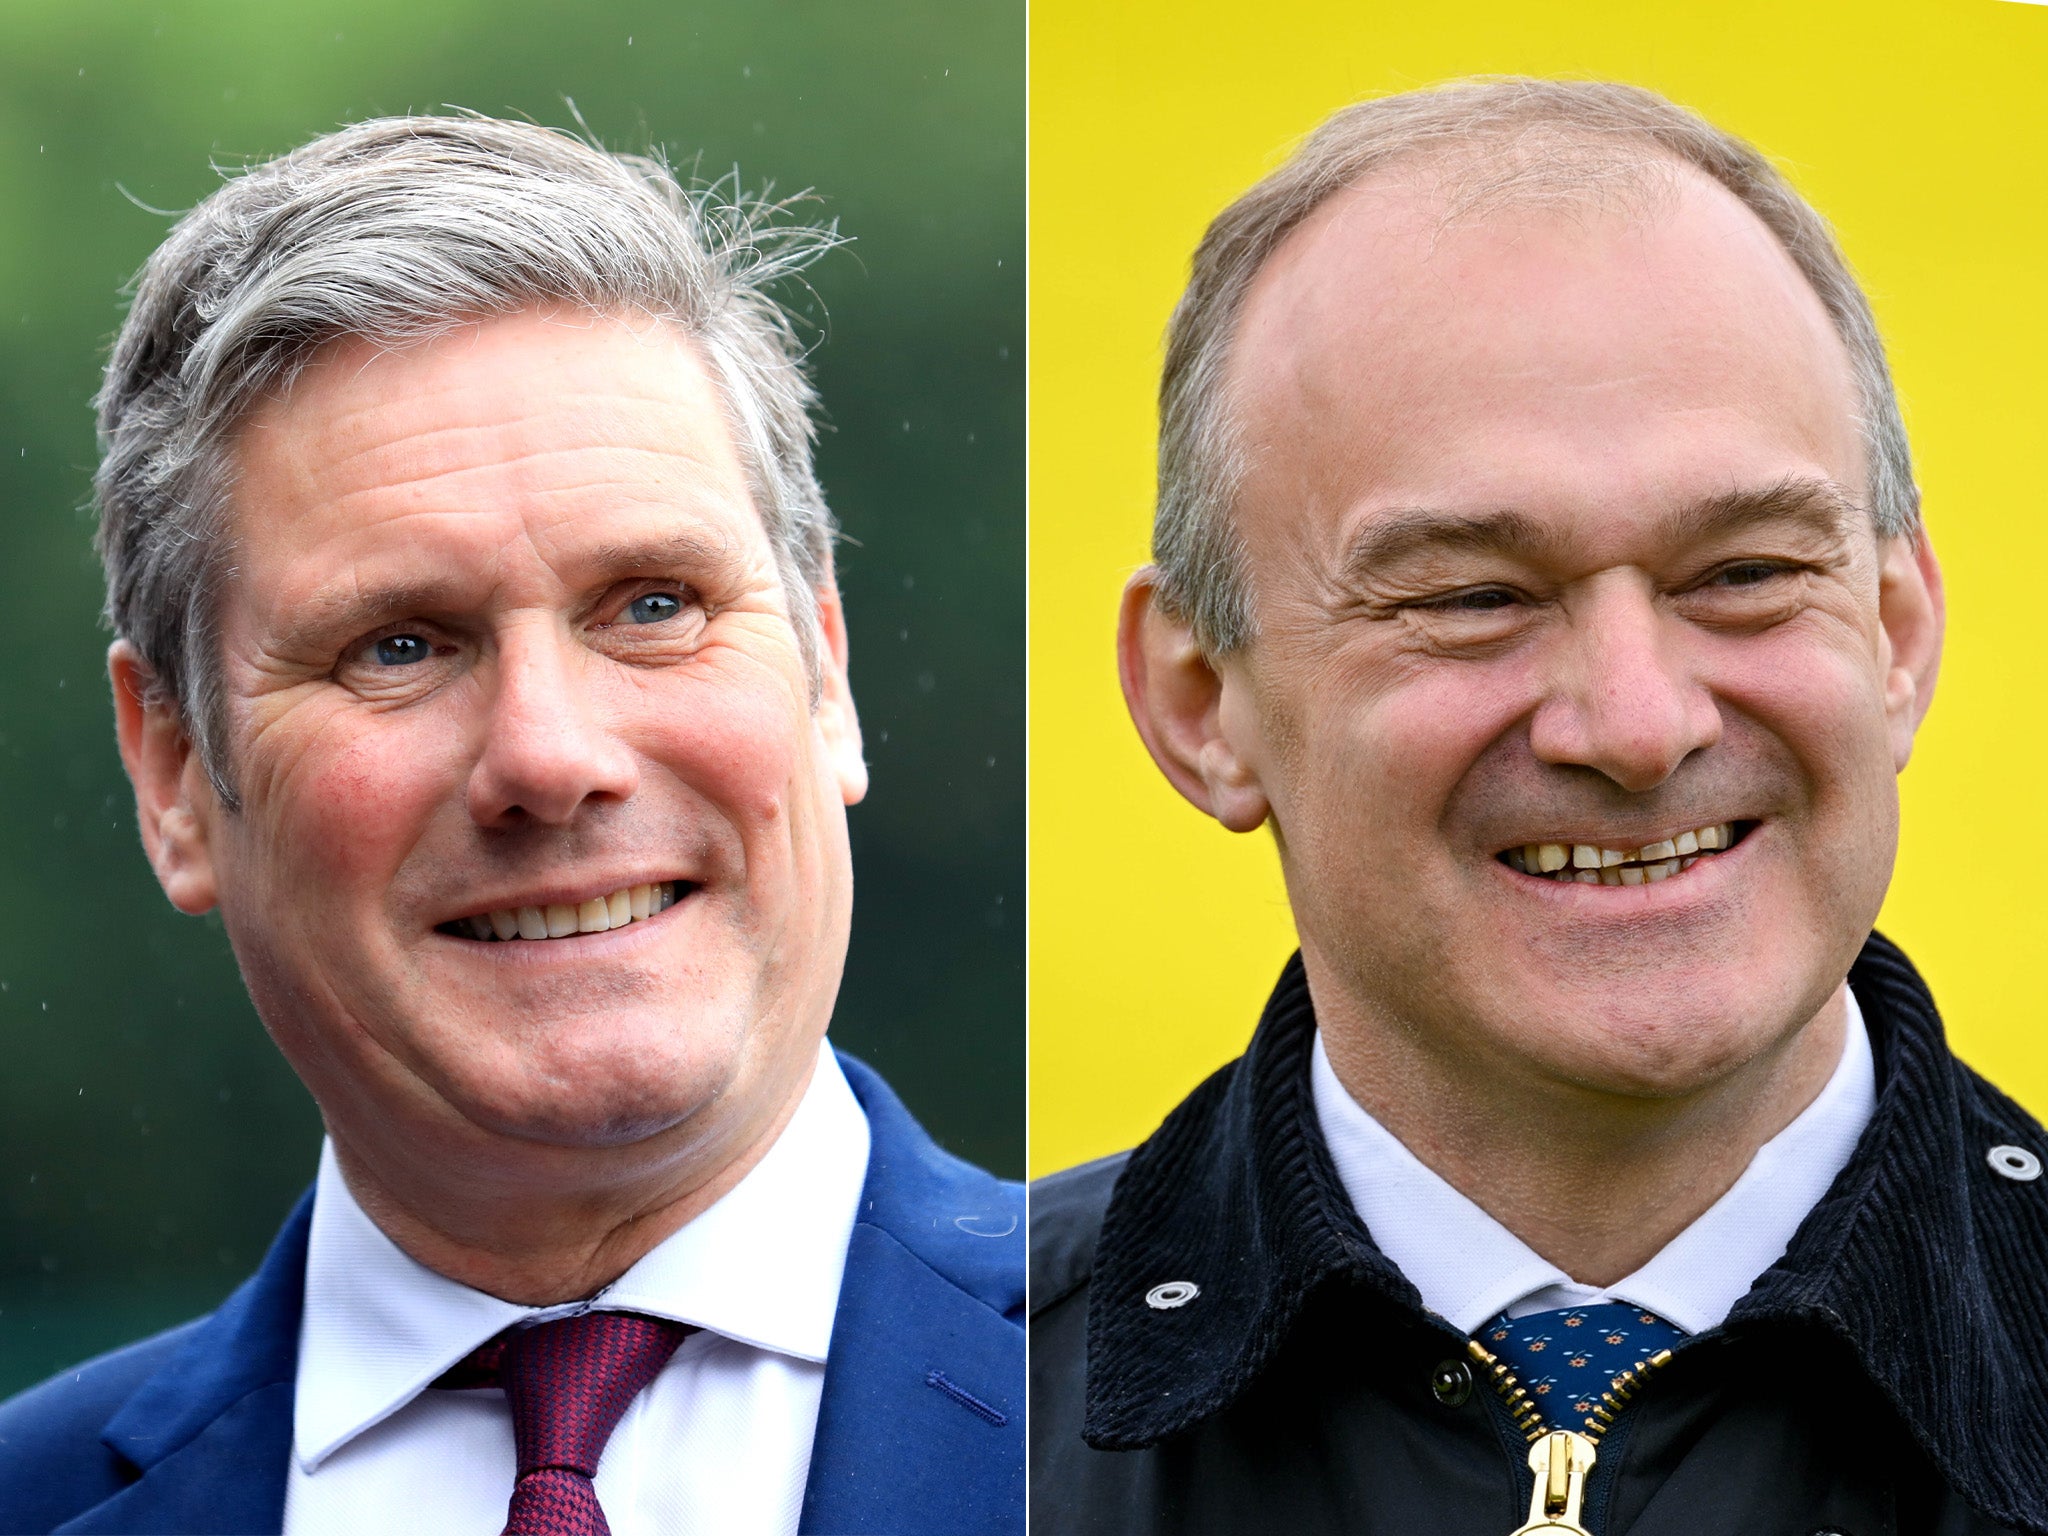 The Labour and Liberal Democrat leaders, Sir Keir Starmer and Sir Ed Davey